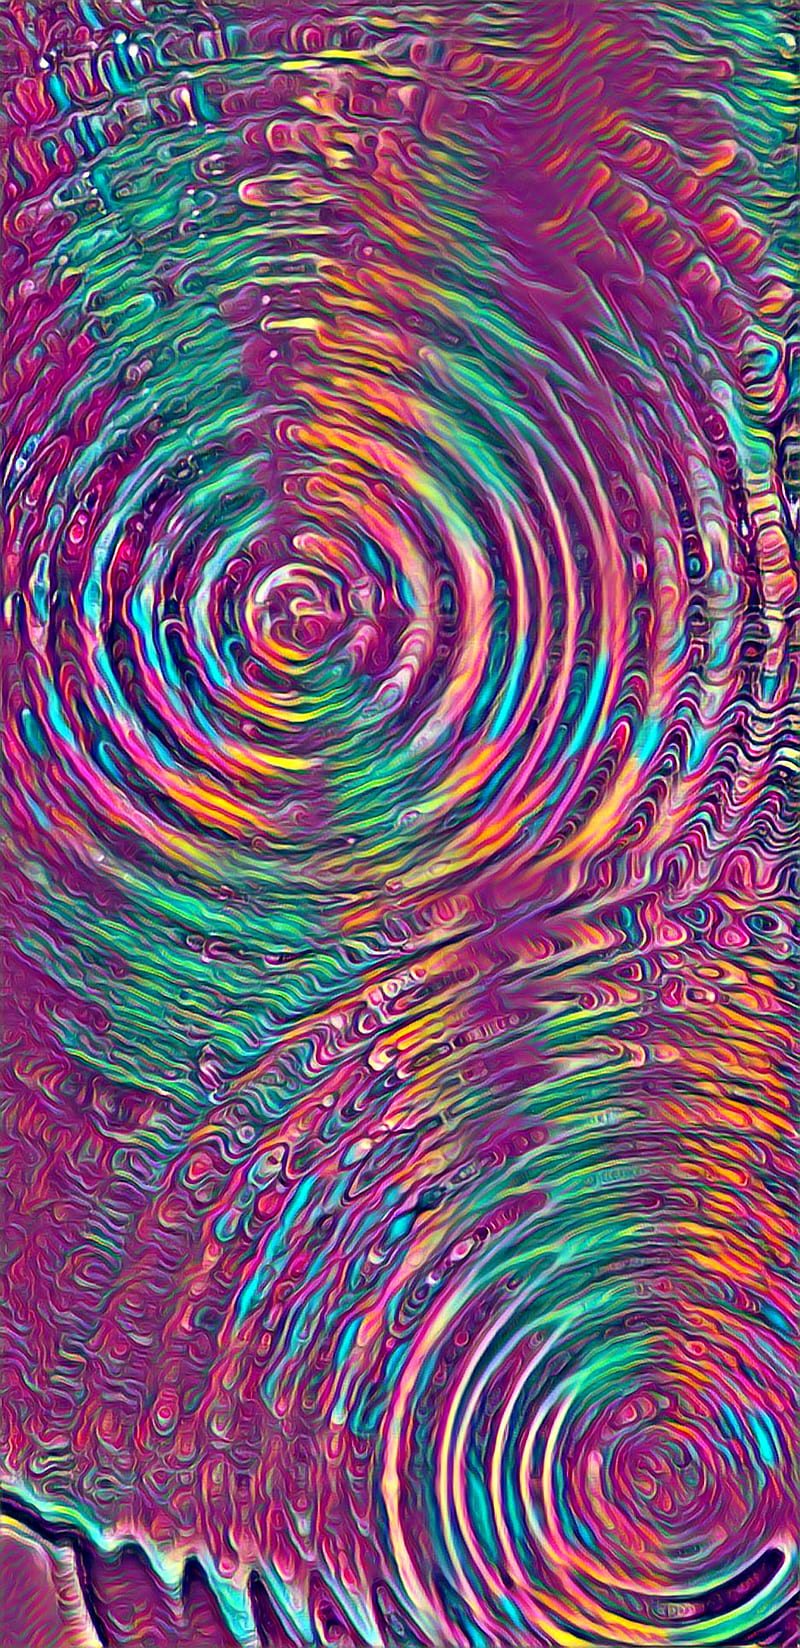 Ripple 27, 420, Imaginesium, abstract, aqua, art, awesome, balls, black, blue, color, desenho, gray, green, lines, melt, mind, network, neural, odd, orange, purple, rainbow, red, shrooms, teal, tripping, trippy, water, weird, white, yellow, HD phone wallpaper